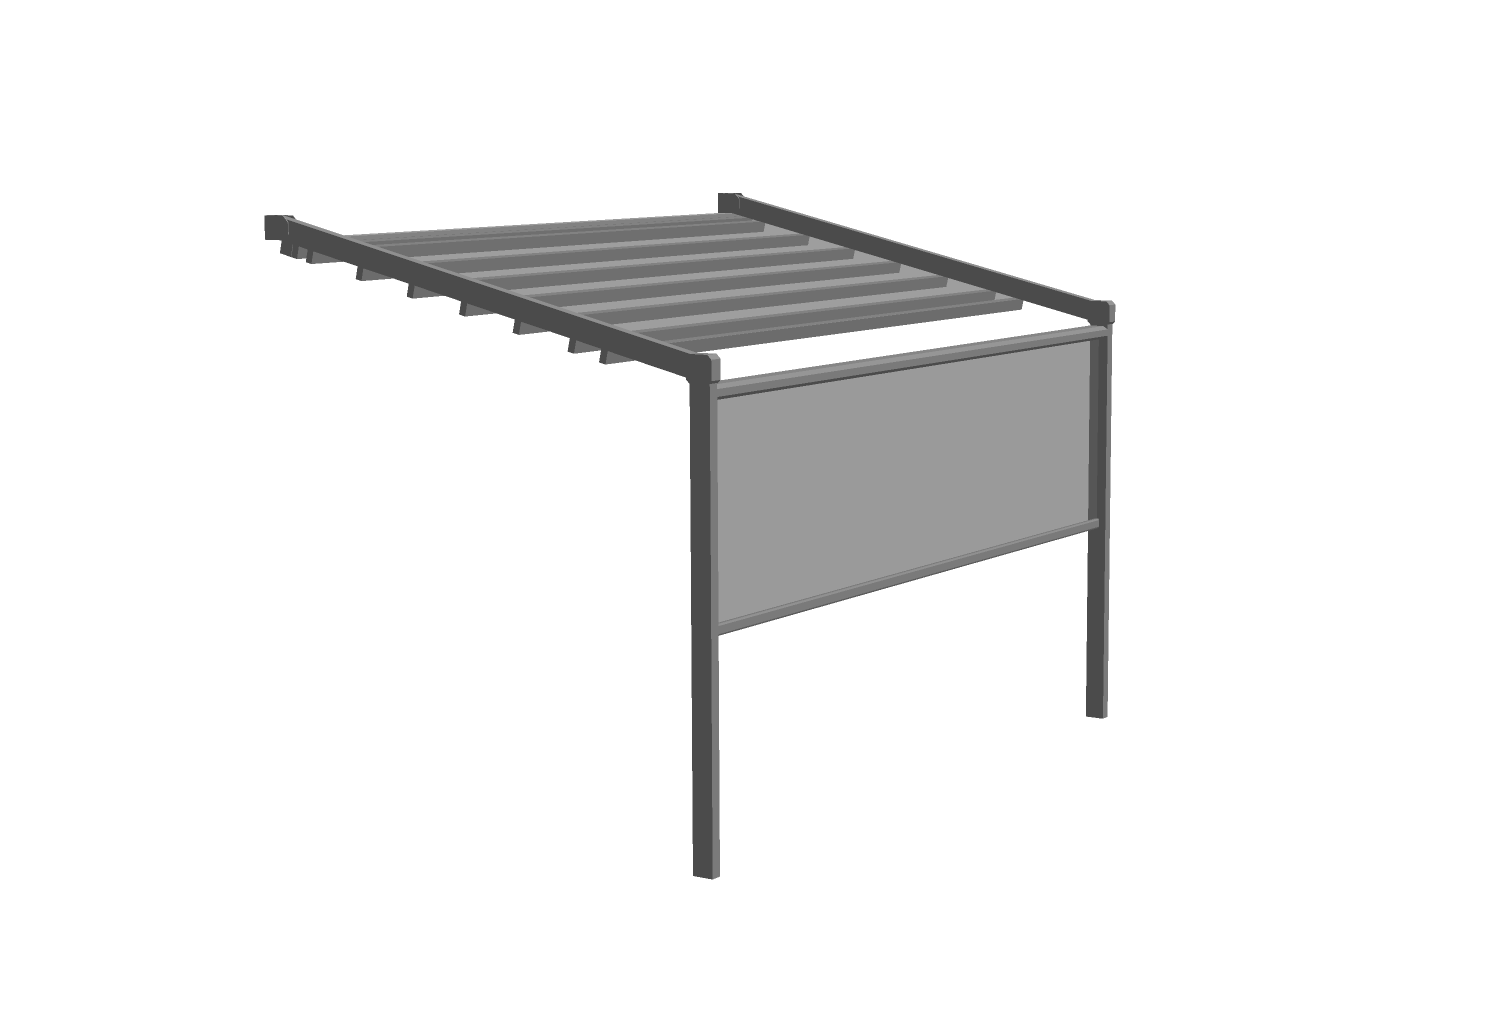 3D model of a retractable roof with drop shade awning